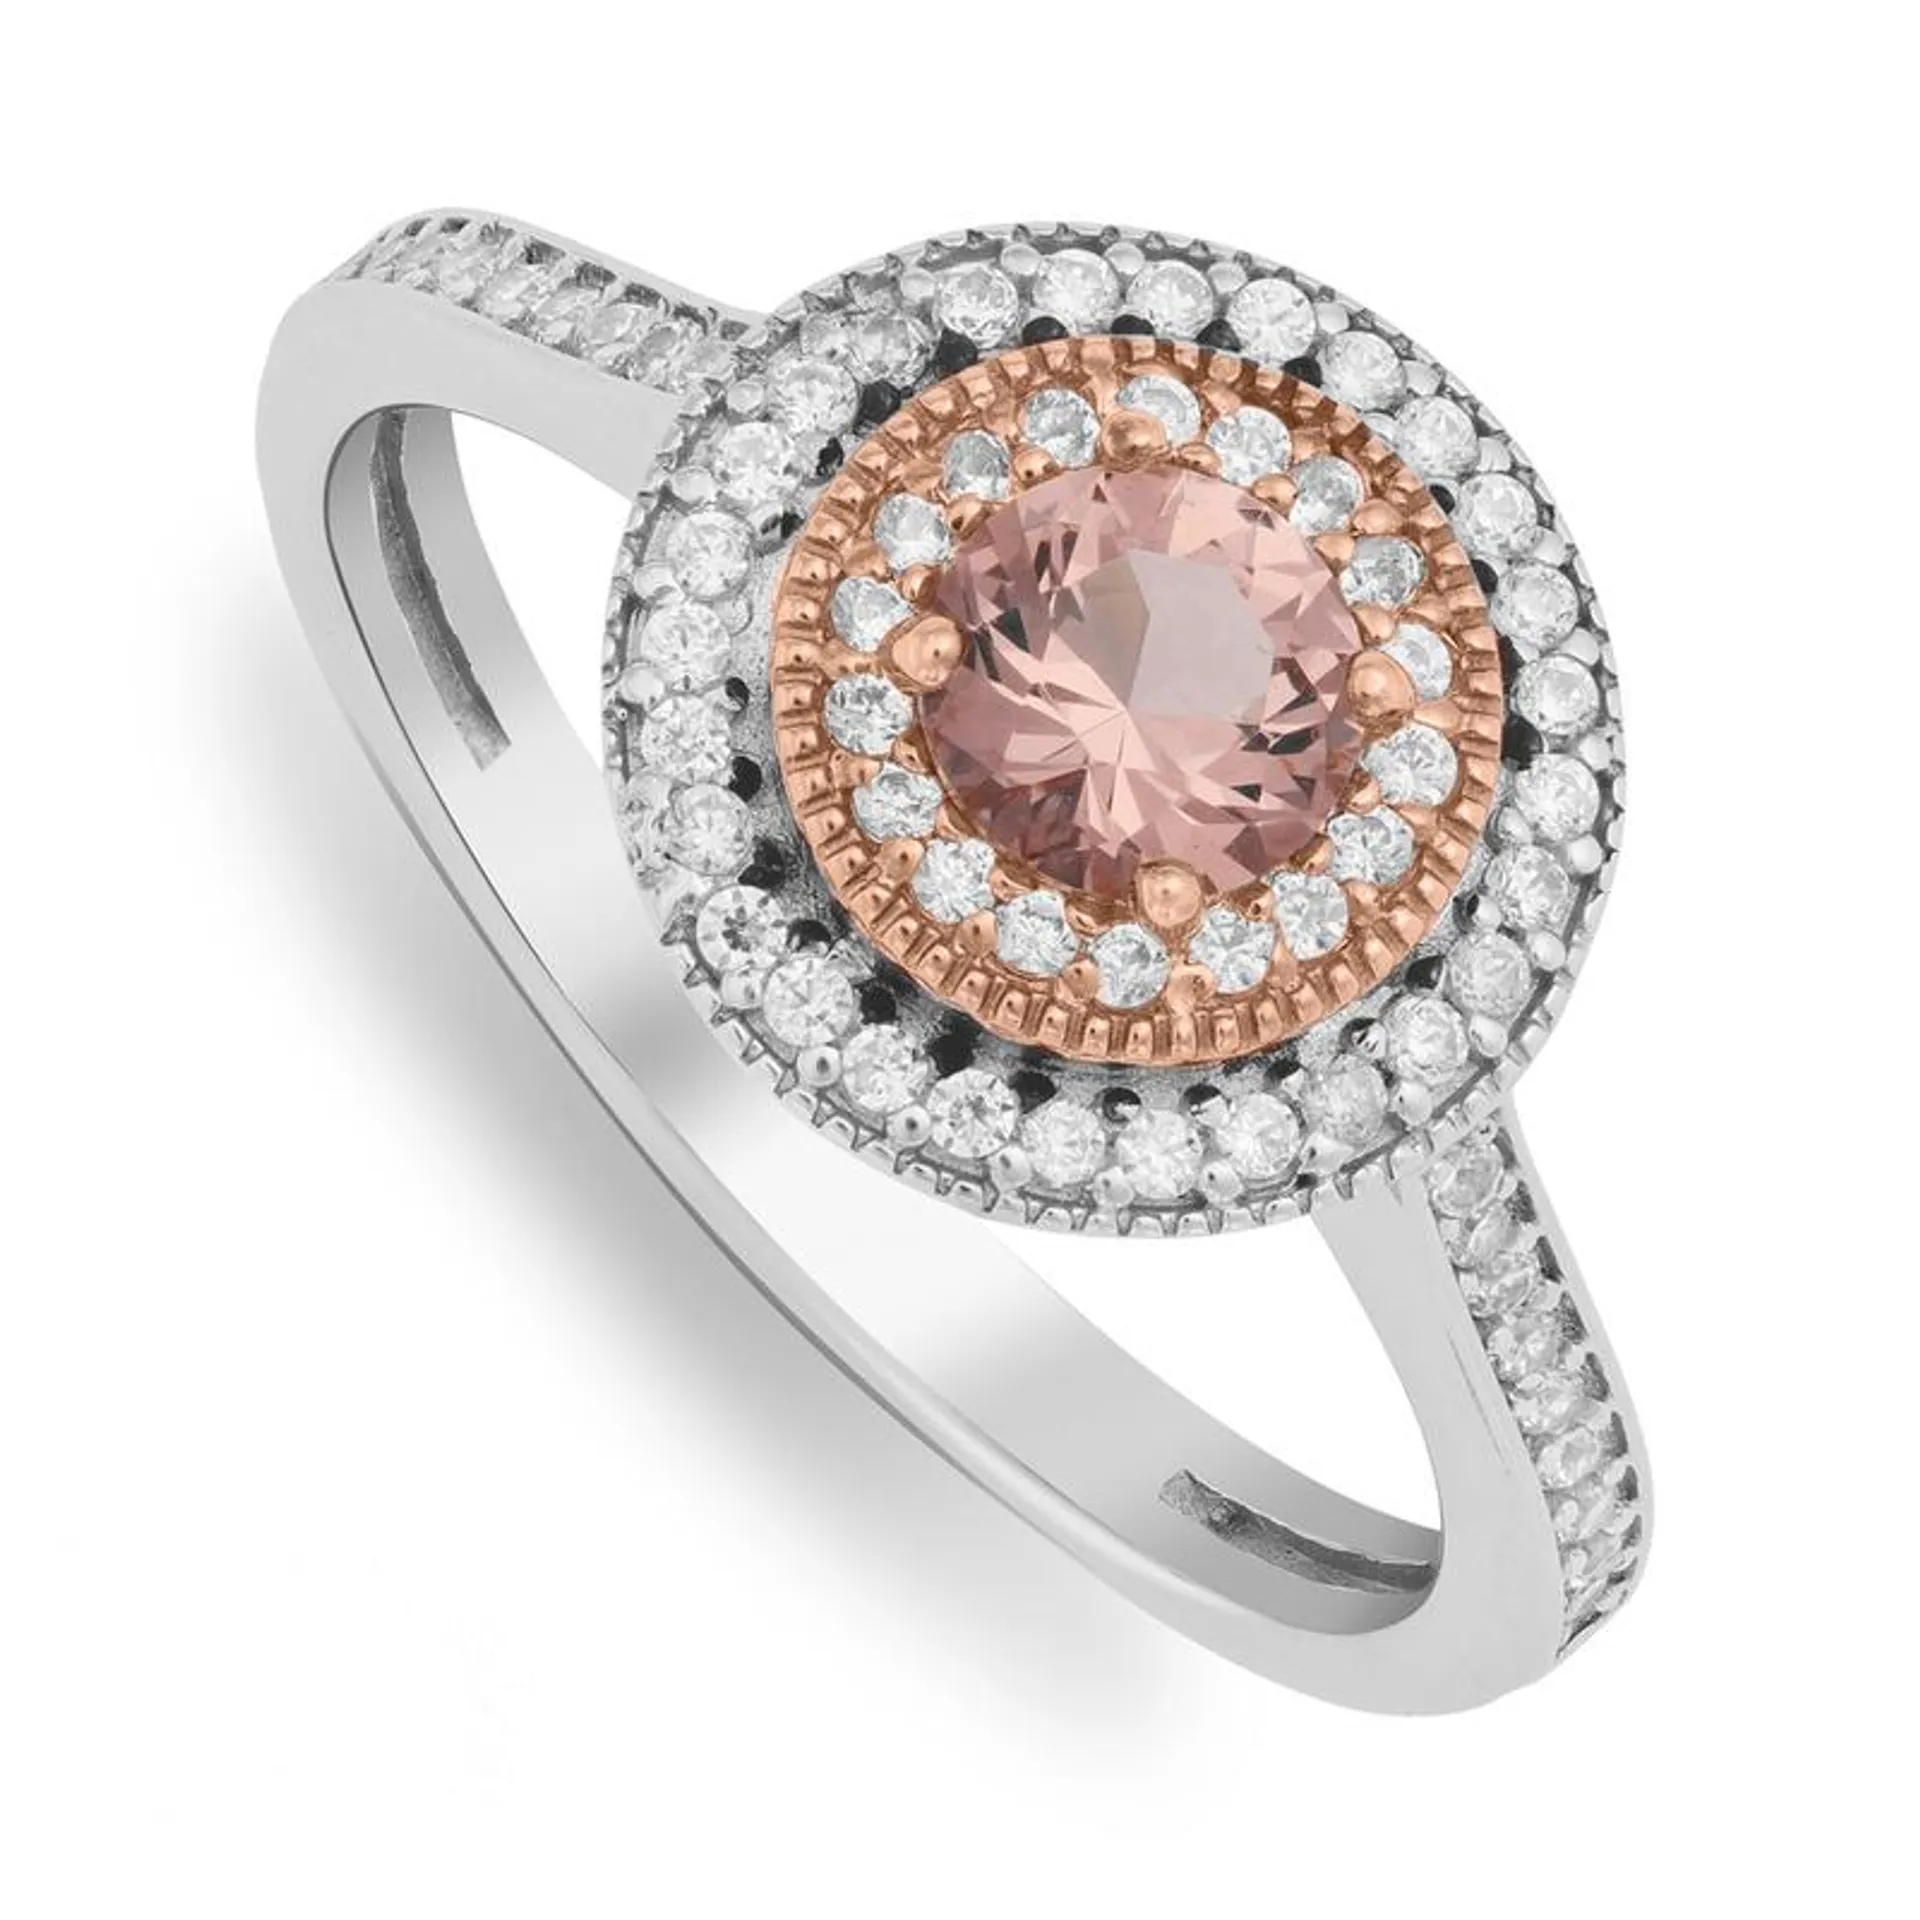 Sterling Silver & Rose Gold, Pink Cubic Zirconia Halo Ring